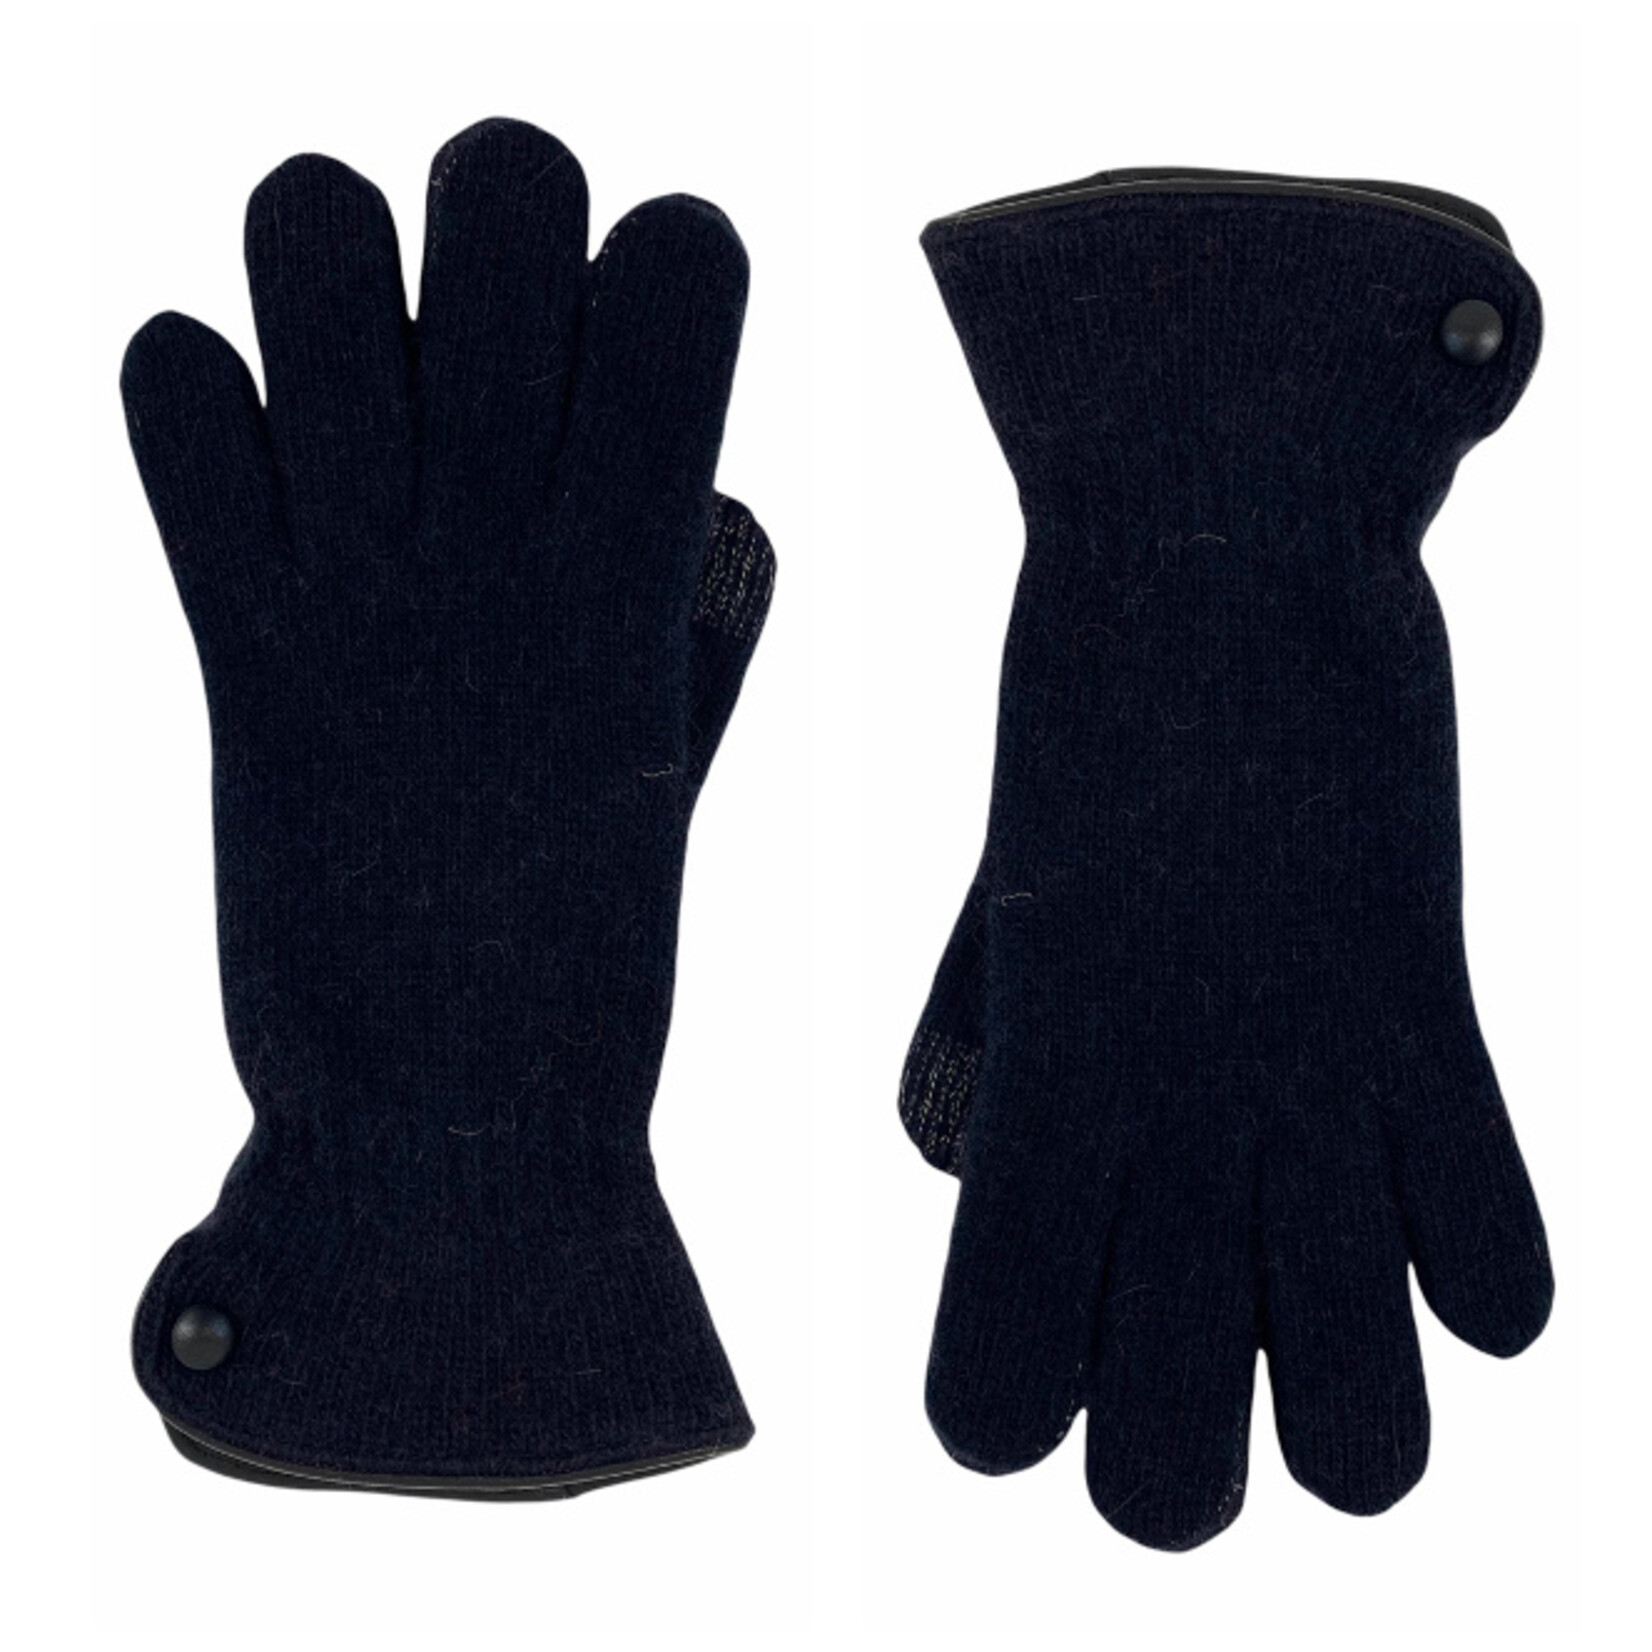 SANTACANA COMPLEMENTOS SI Cashmere Gloves Leather Trim and Button